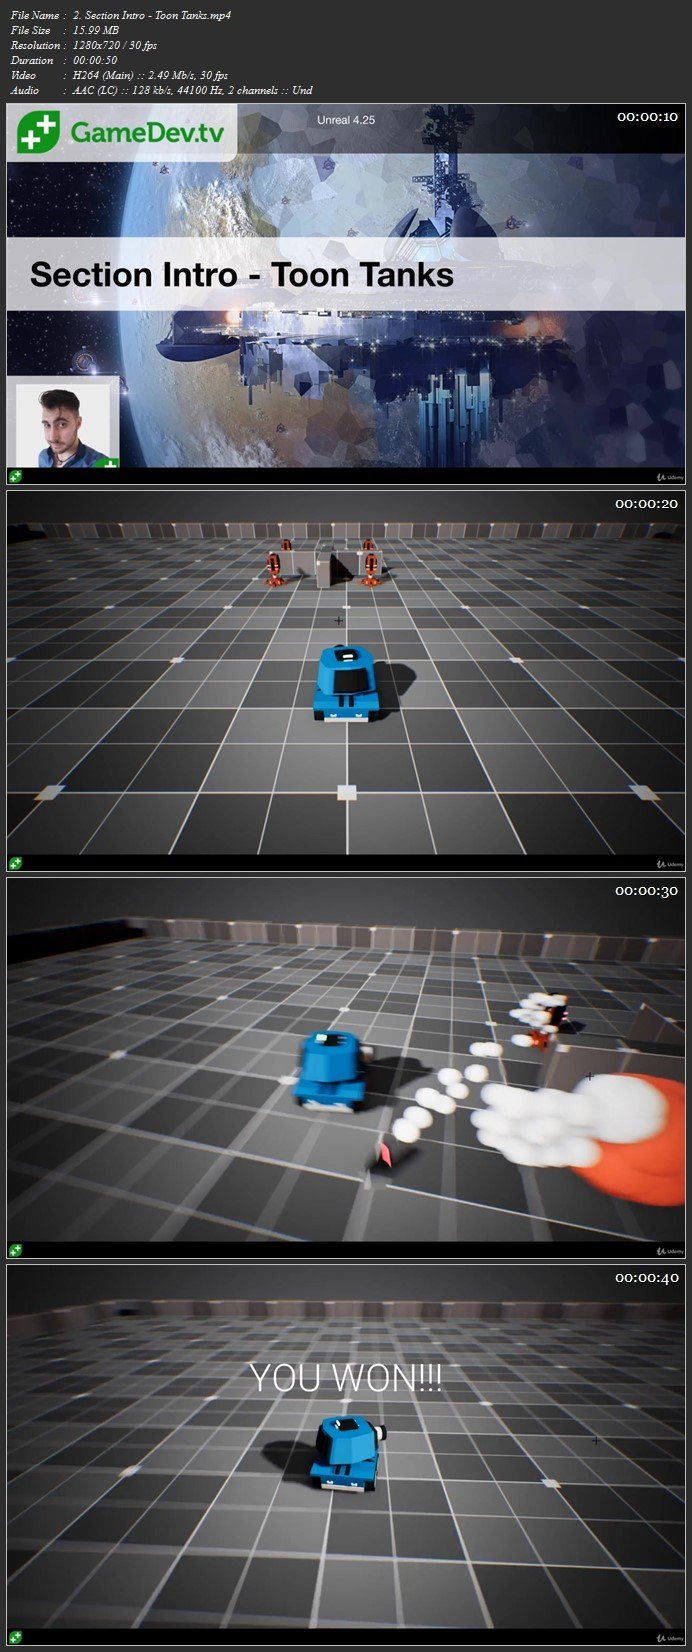 Unreal Engine C++ Developer: Learn C++ and Make Video Games